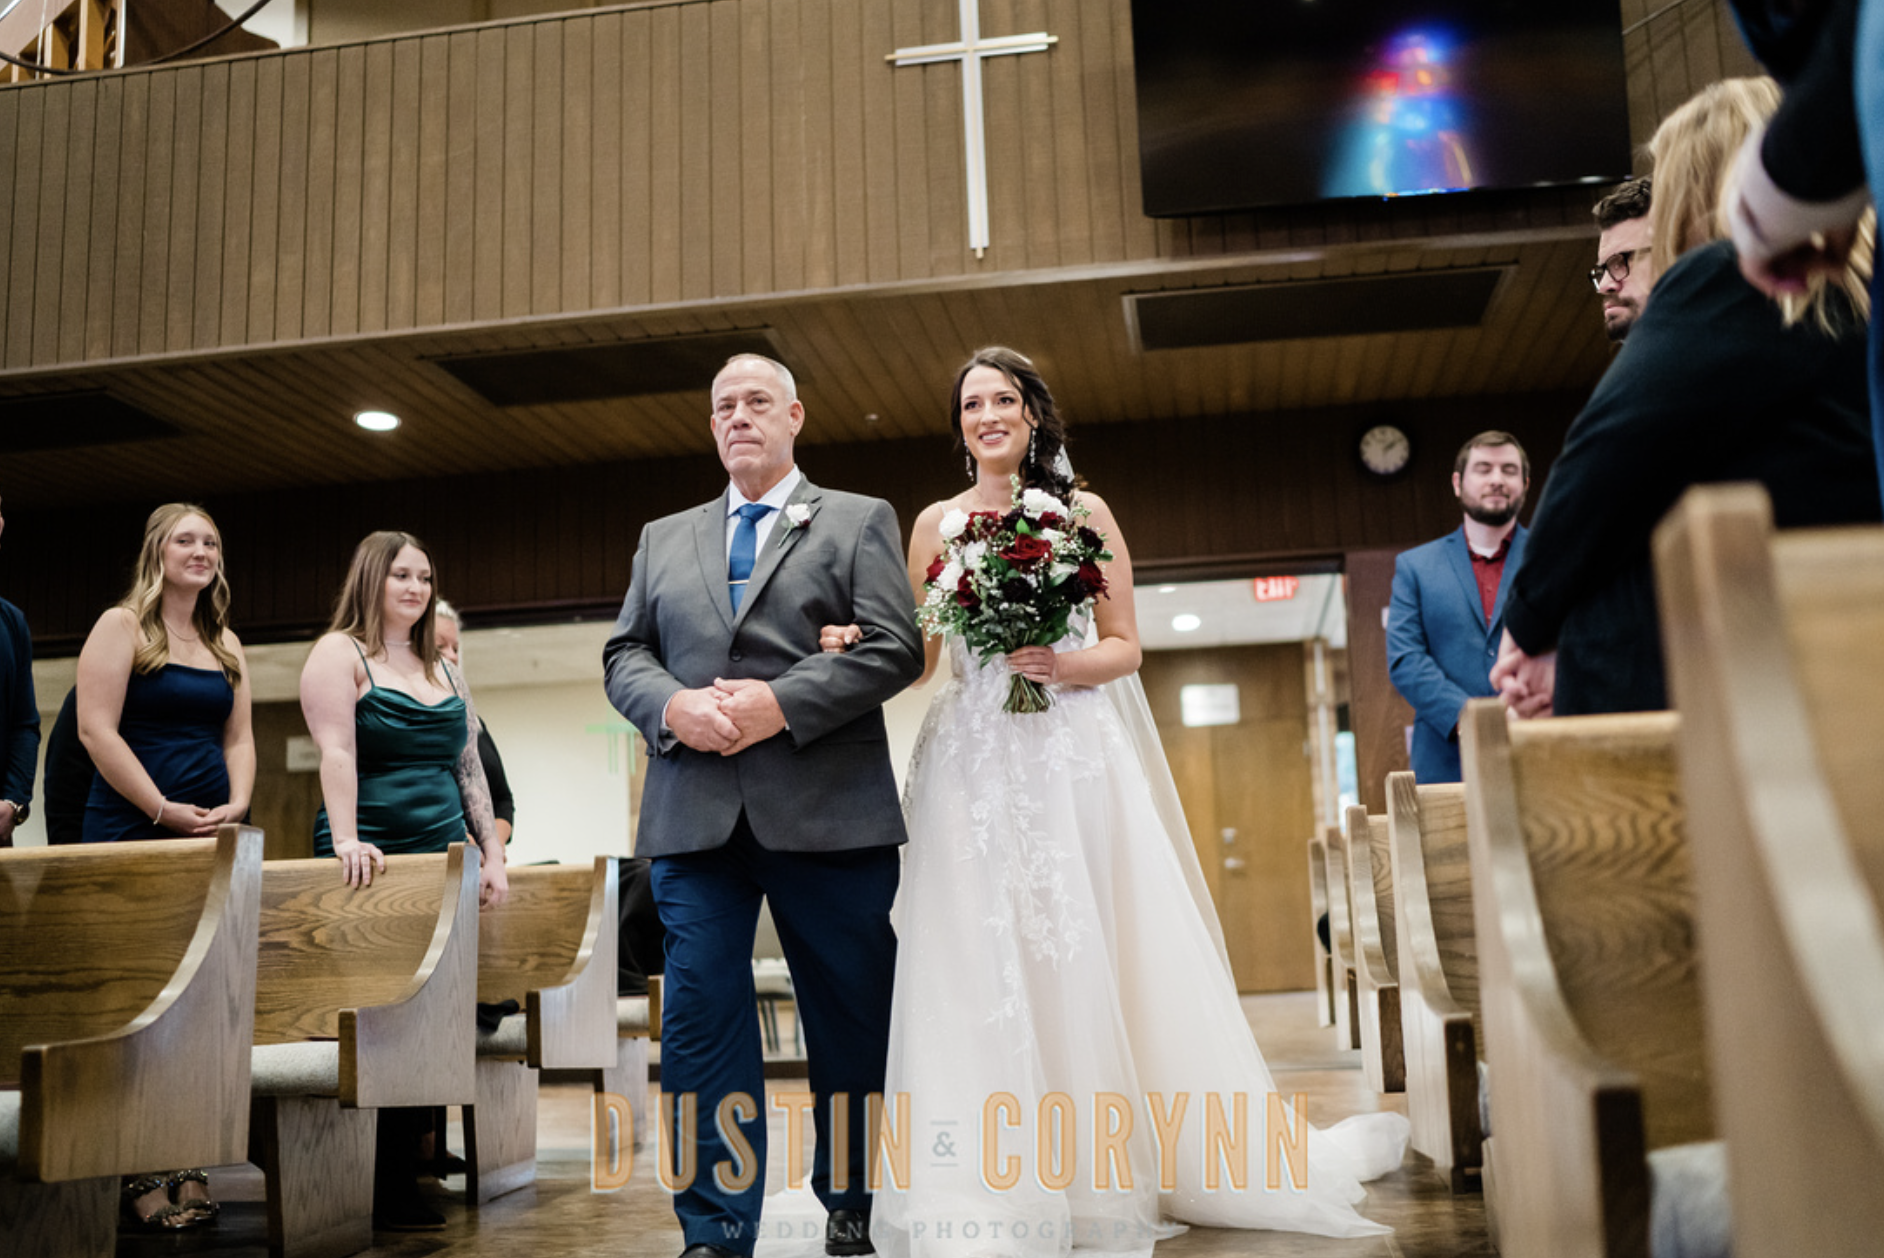 bride being walked down aisle by her father while wearing wedding gown